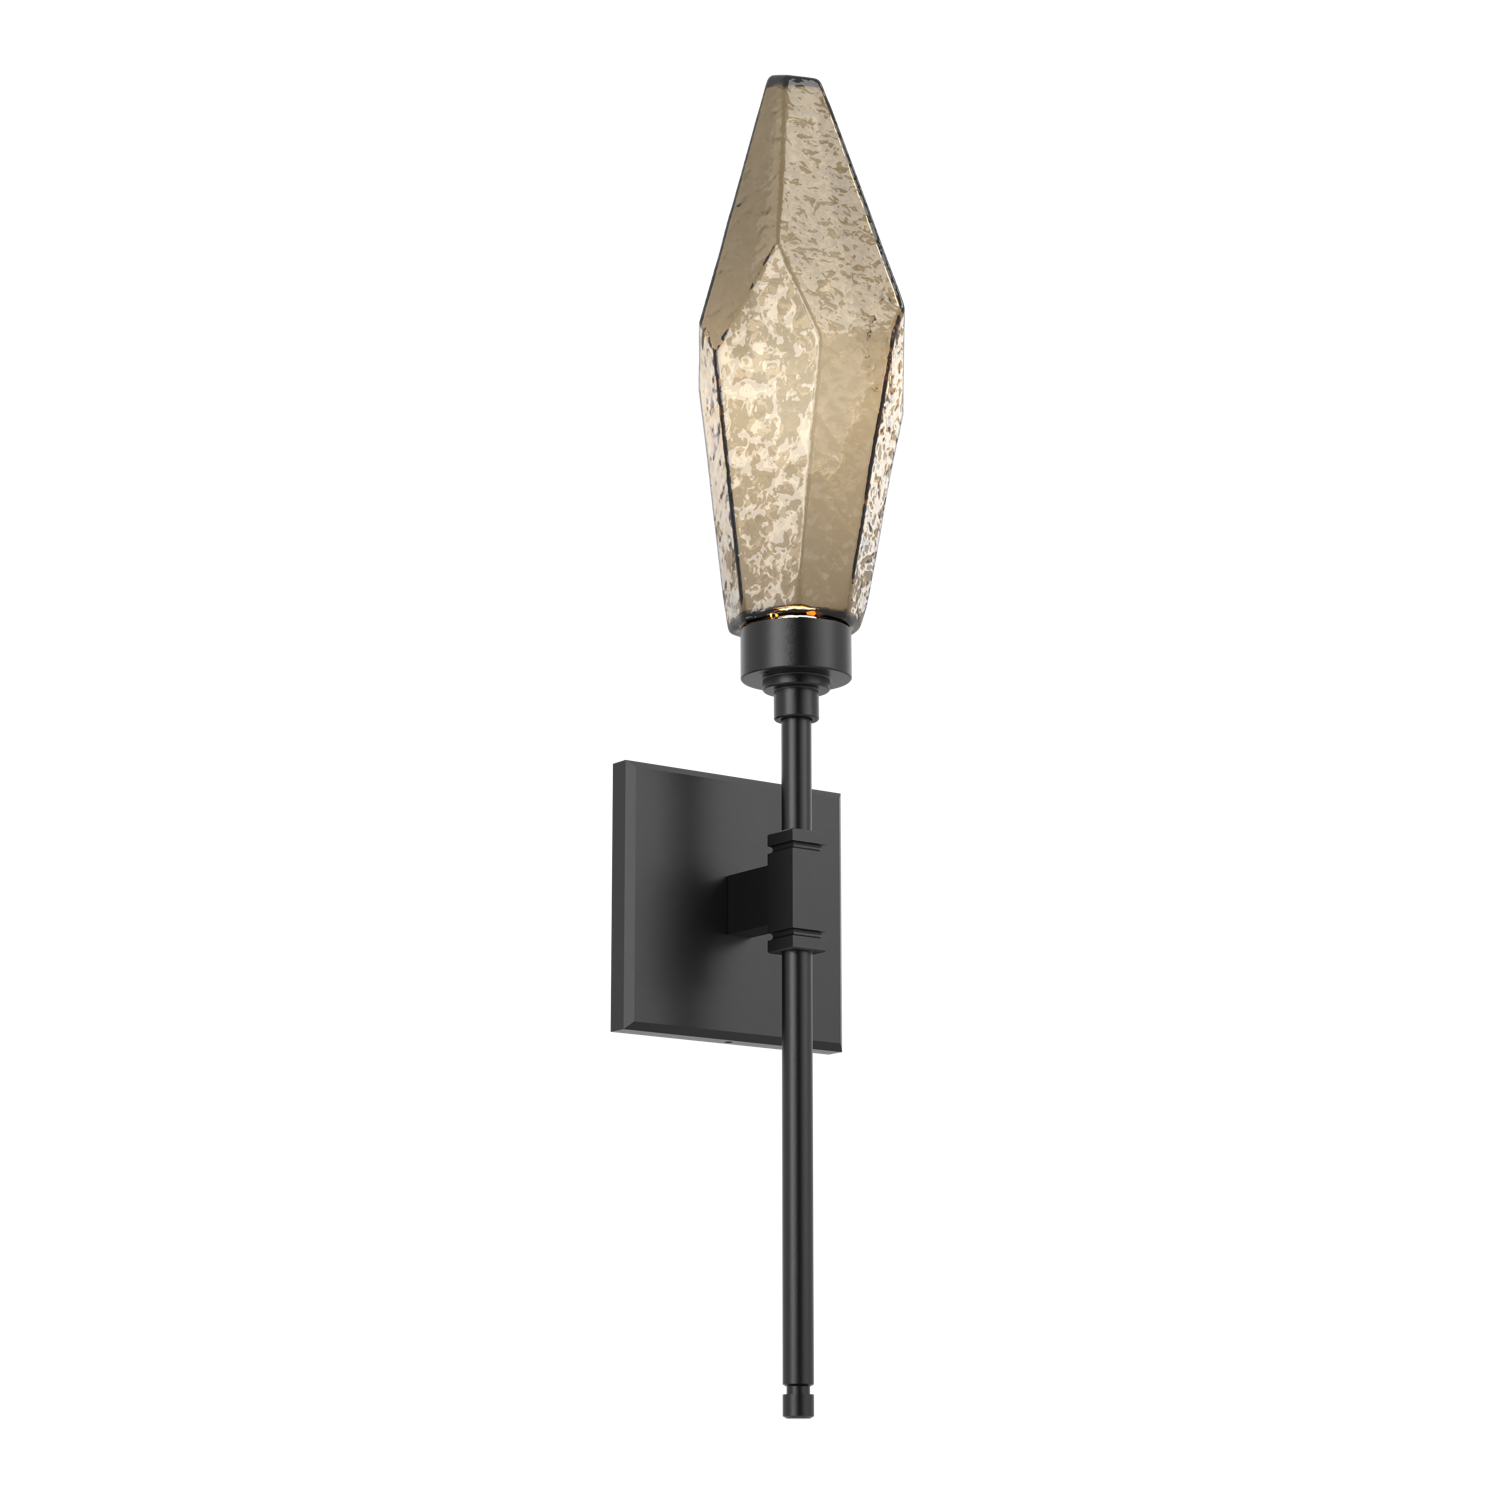 IDB0050-04-MB-CB-Hammerton-Studio-Rock-Crystal-ada-certified-belvedere-wall-sconce-with-matte-black-finish-and-chilled-bronze-blown-glass-shades-and-LED-lamping